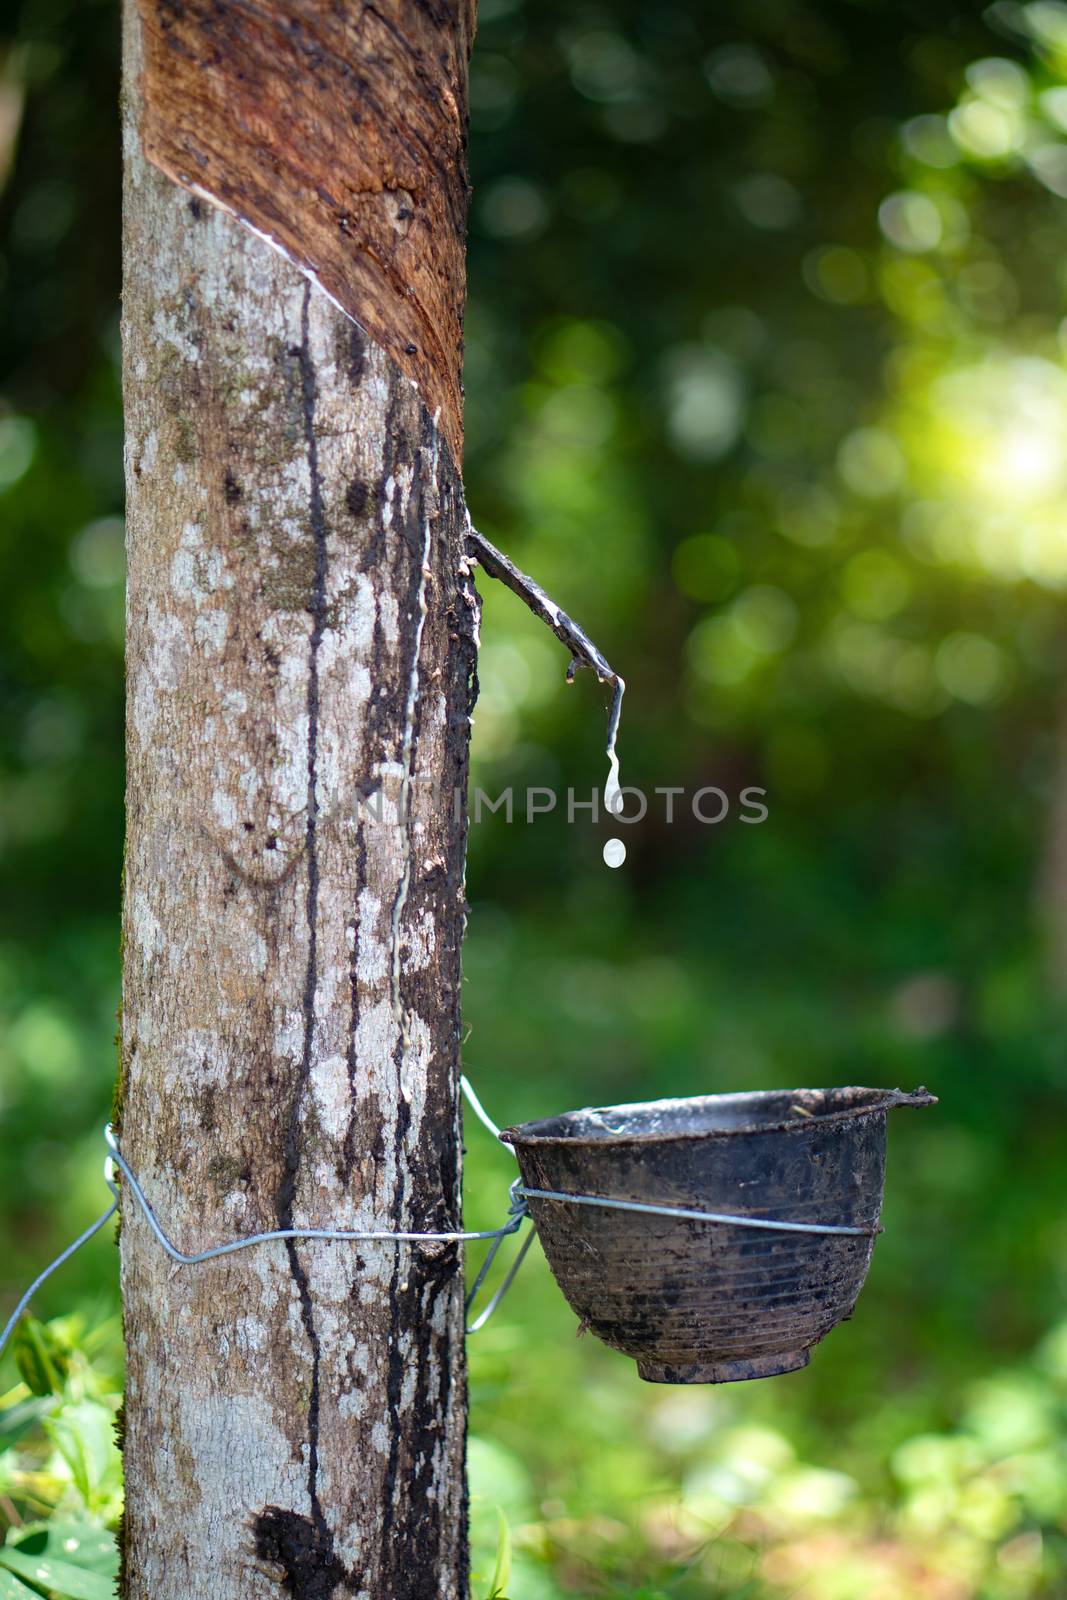 Rubber trees that have been tapped to remove the rubber in the rubber plantation.